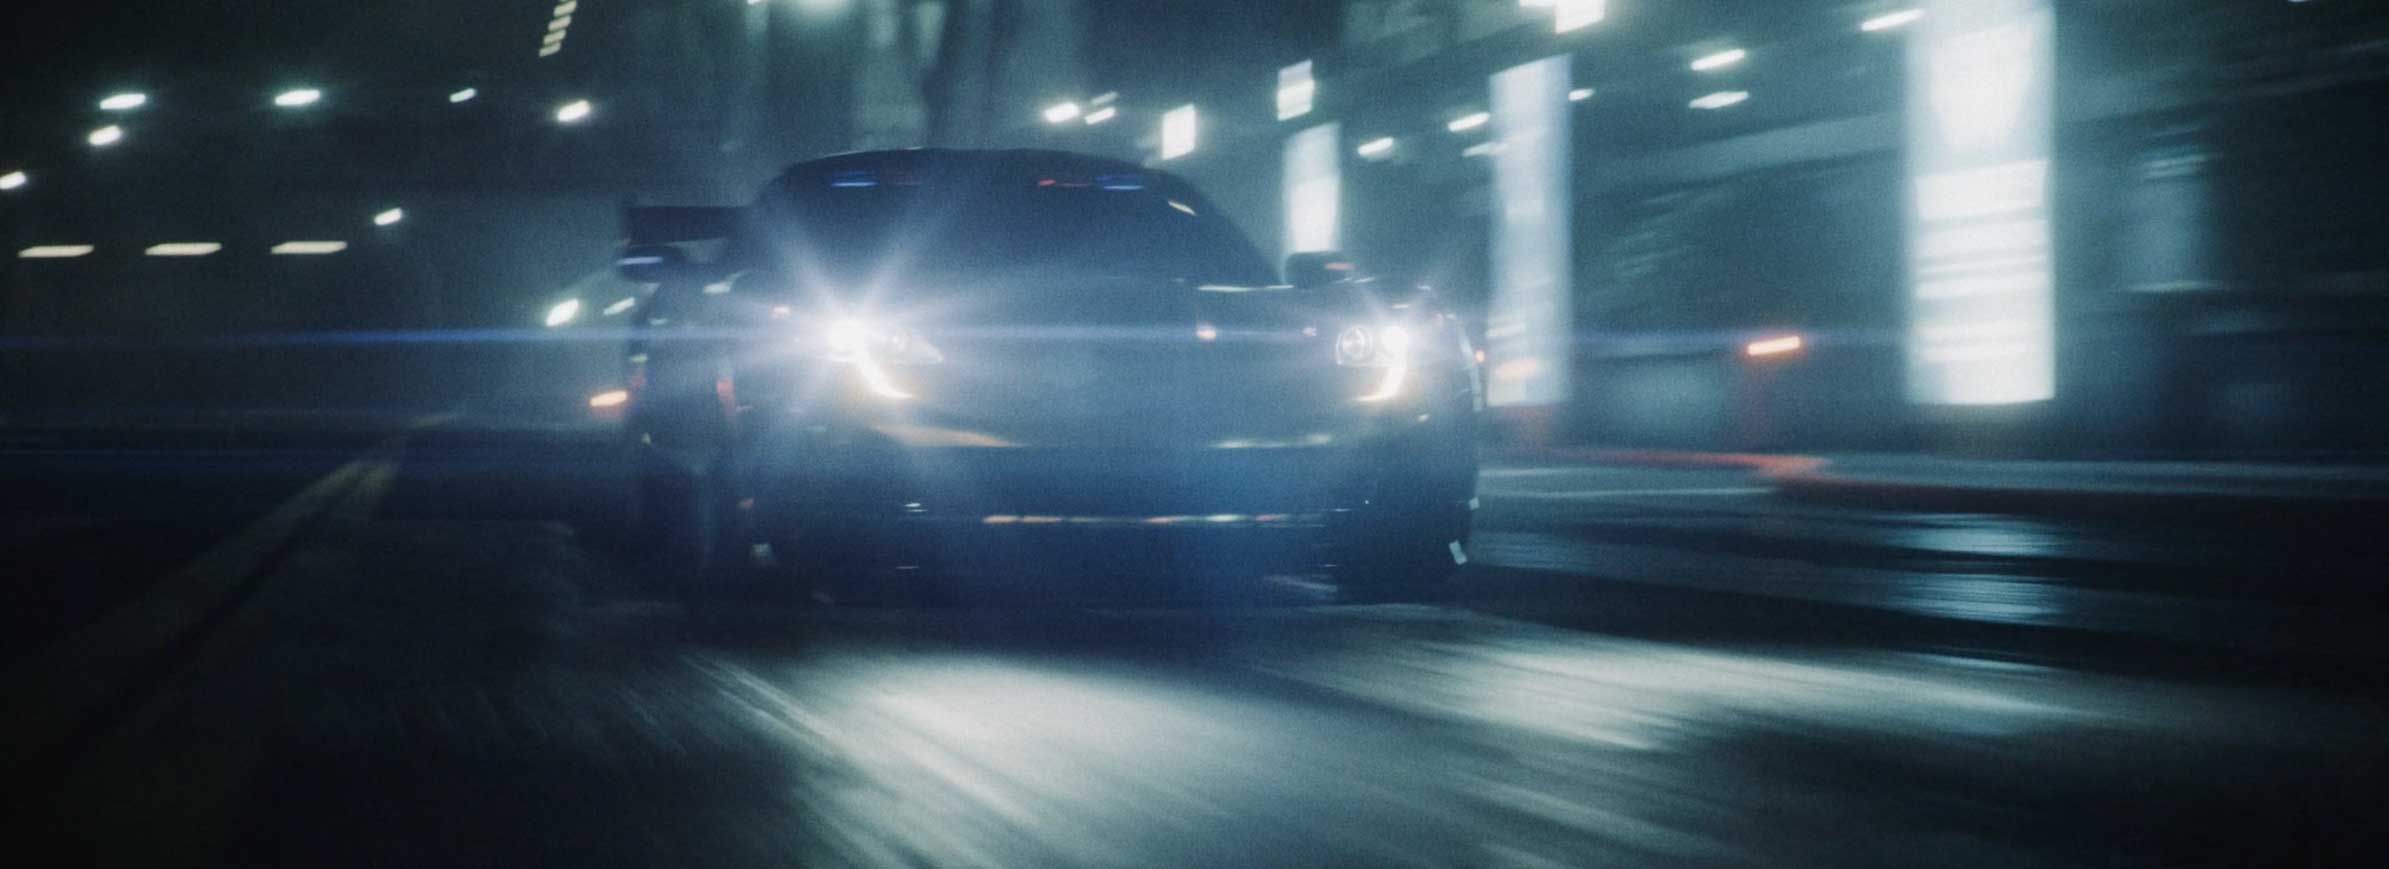 Futhark Studios Need for Speed Most Wanted Trailer Remake | STASH MAGAZINE